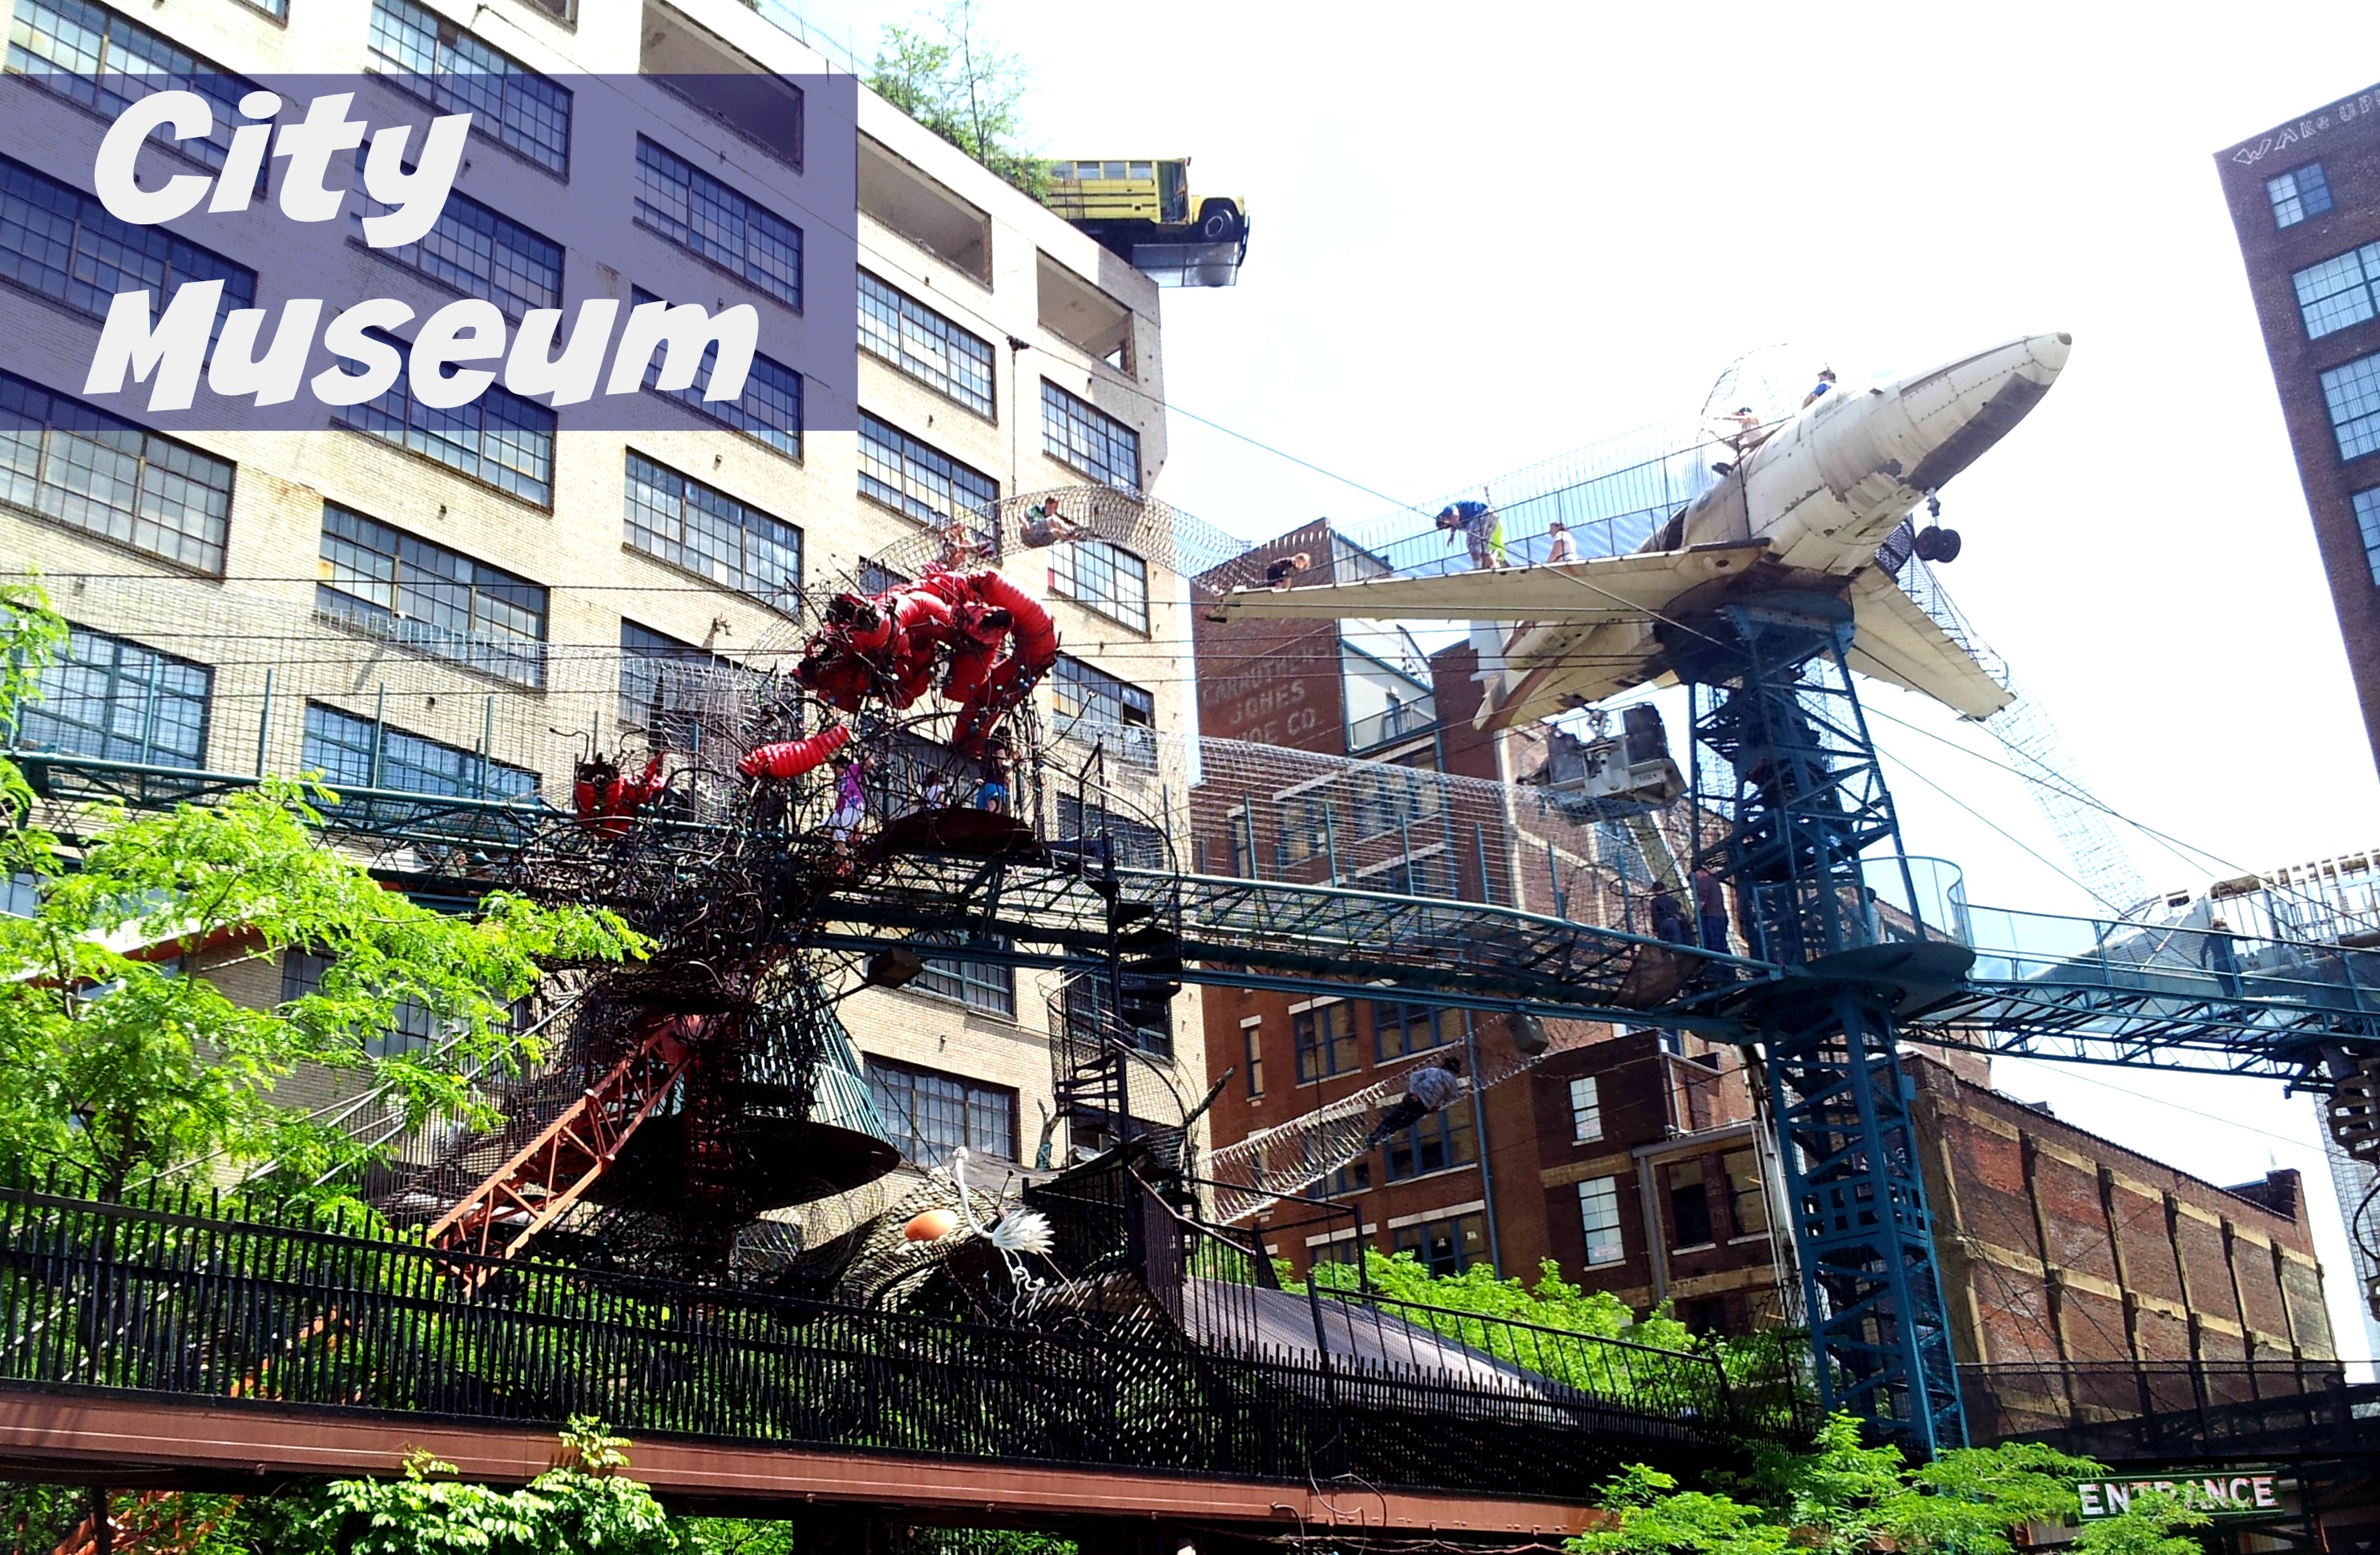 City Museum: The Coolest Place in St. Louis